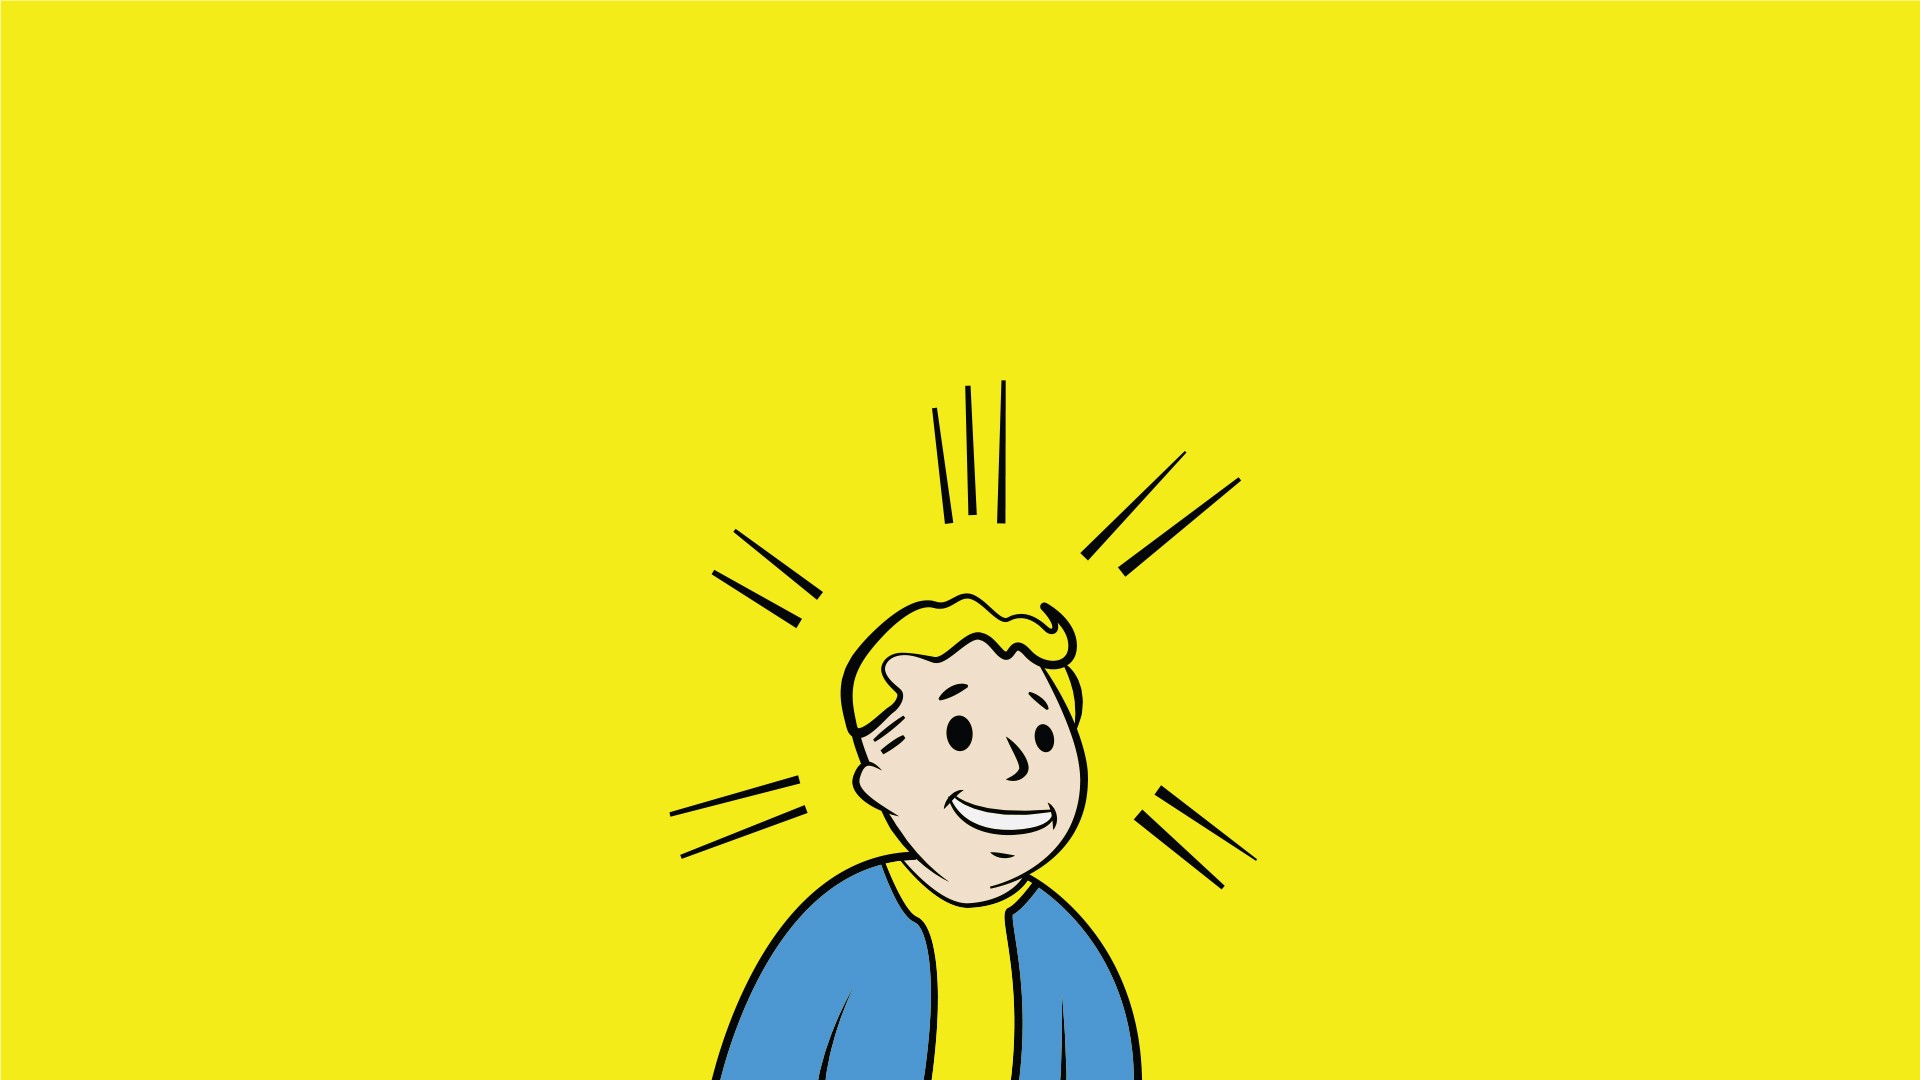 General 1920x1080 Fallout Vault Boy attribute video games PC gaming video game art yellow background simple background